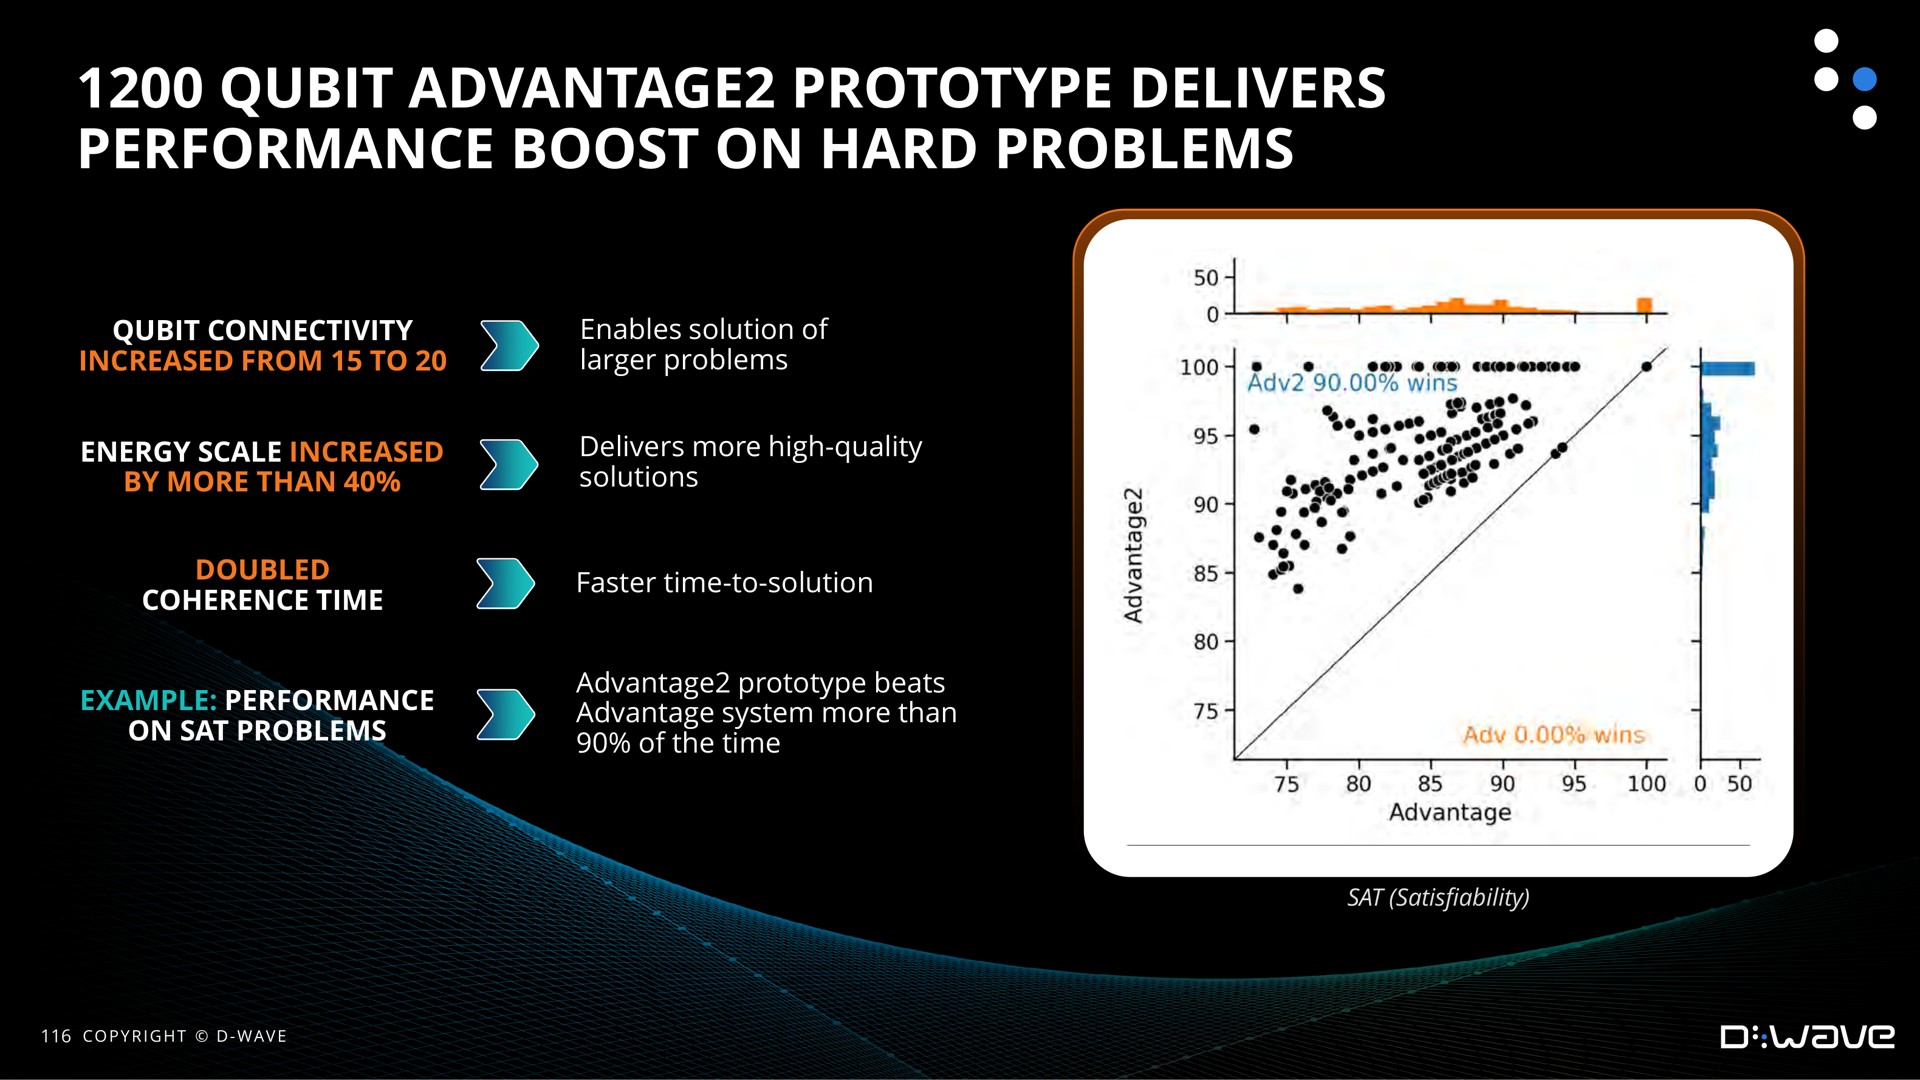 advantage prototype delivers performance boost on hard problems | D-Wave